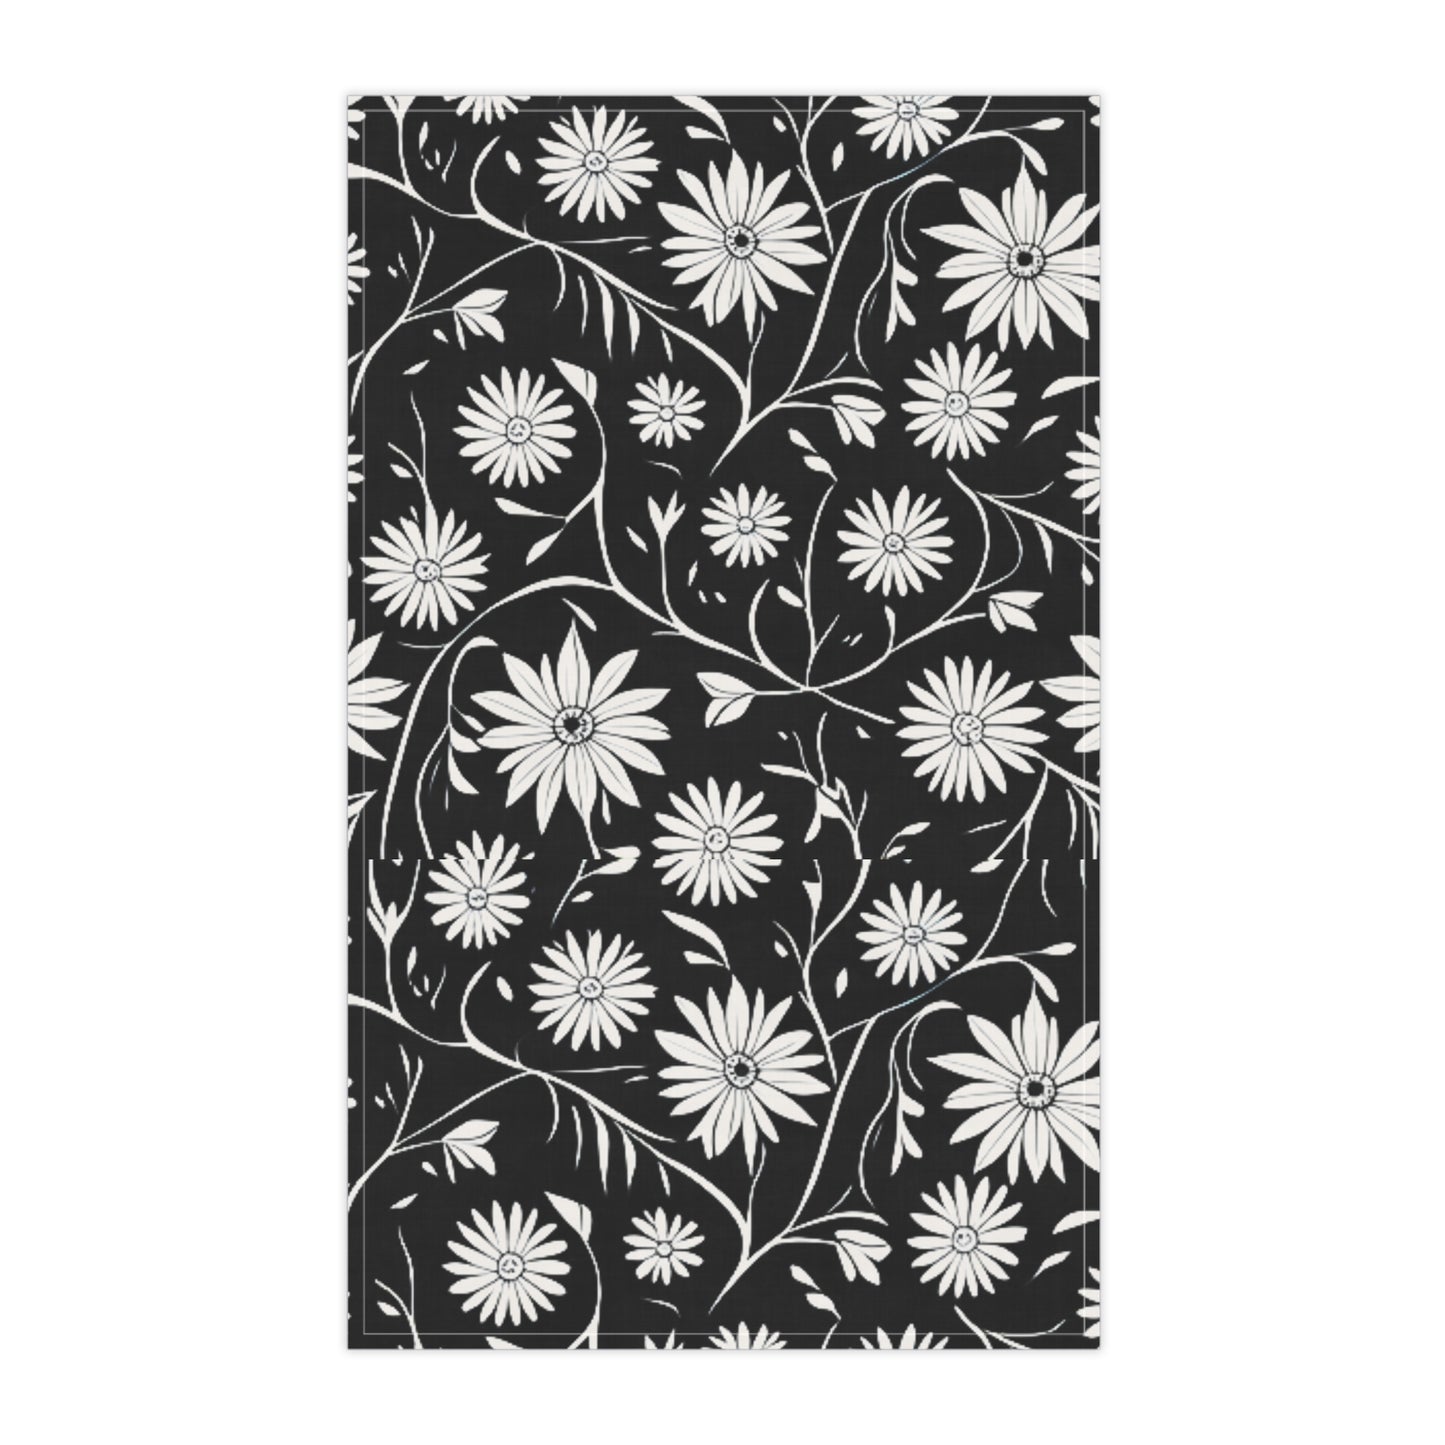 Field of Scandinavian Black and White Daisies 1970S Floral Pattern Decorative Kitchen Tea Towel/Bar Towel